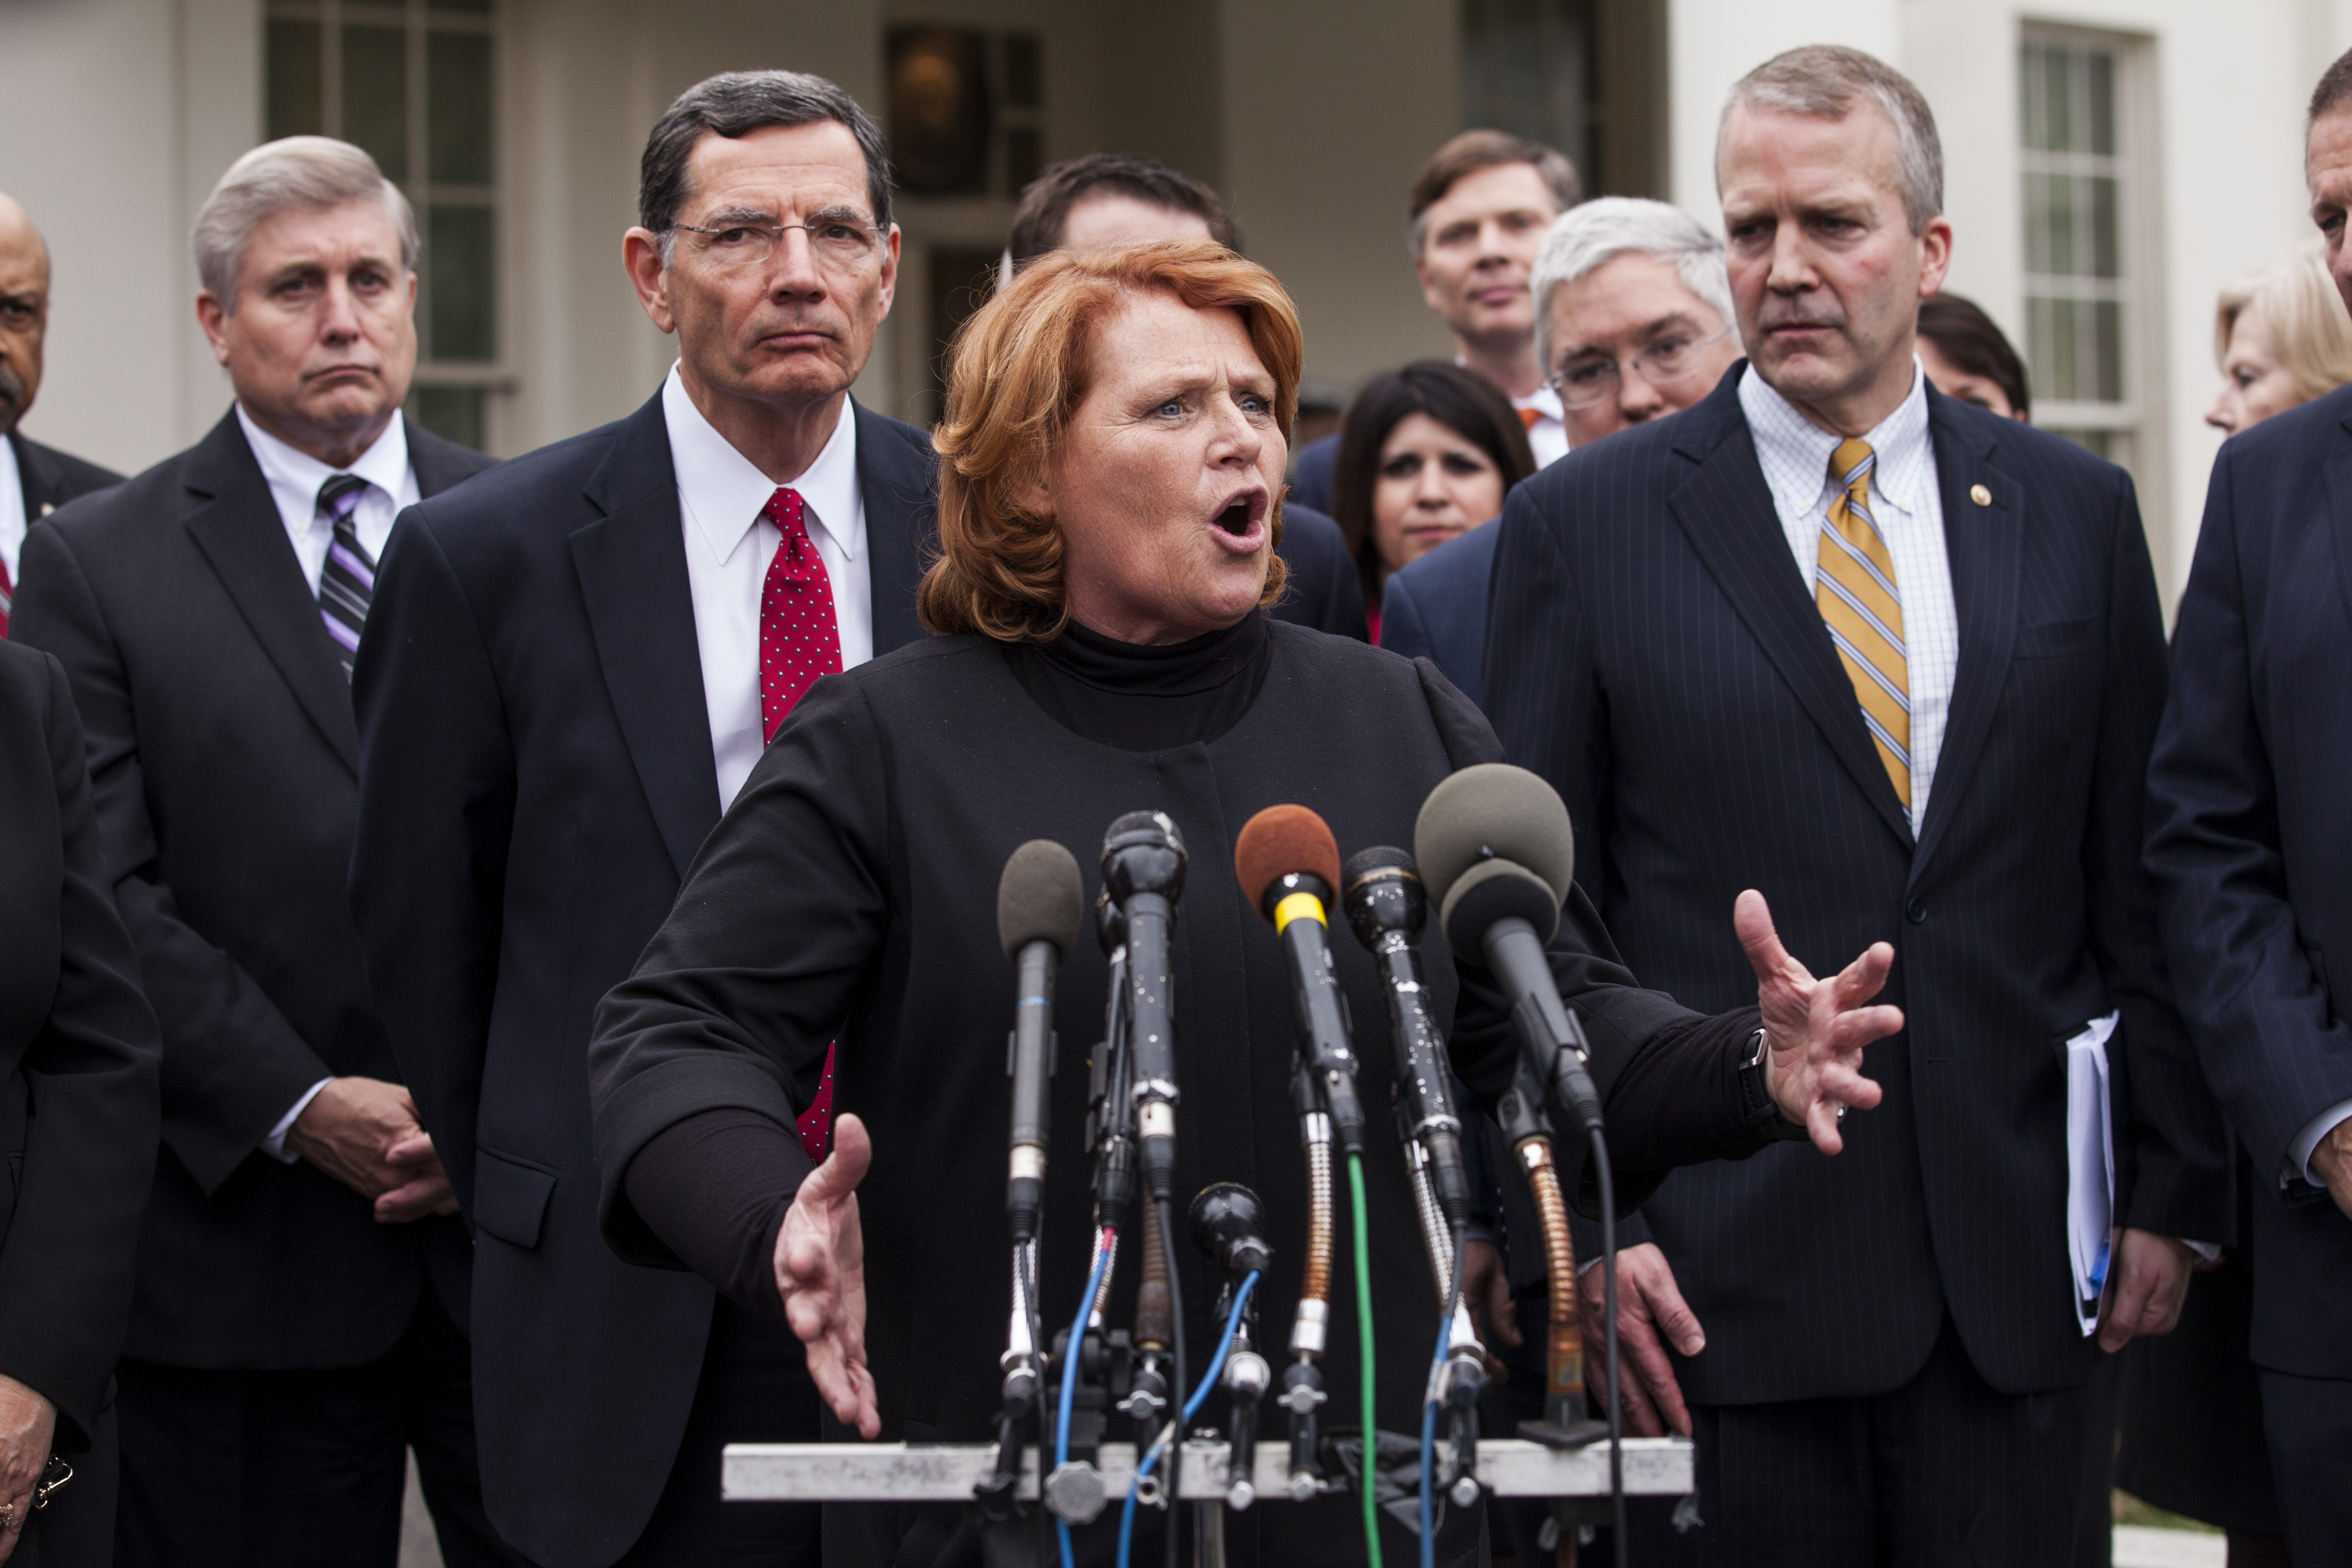 WASHINGTON, D.C. - FEBRUARY 28: Sen. Heidi Heitkamp (D-ND) speaks to the press after President Trump signed an executive order aimed at undoing former President Barack Obama's Clean Water Rule at The White House on February 28, 2017 in Washington, D.C. (Photo by Zach Gibson/Getty Images)